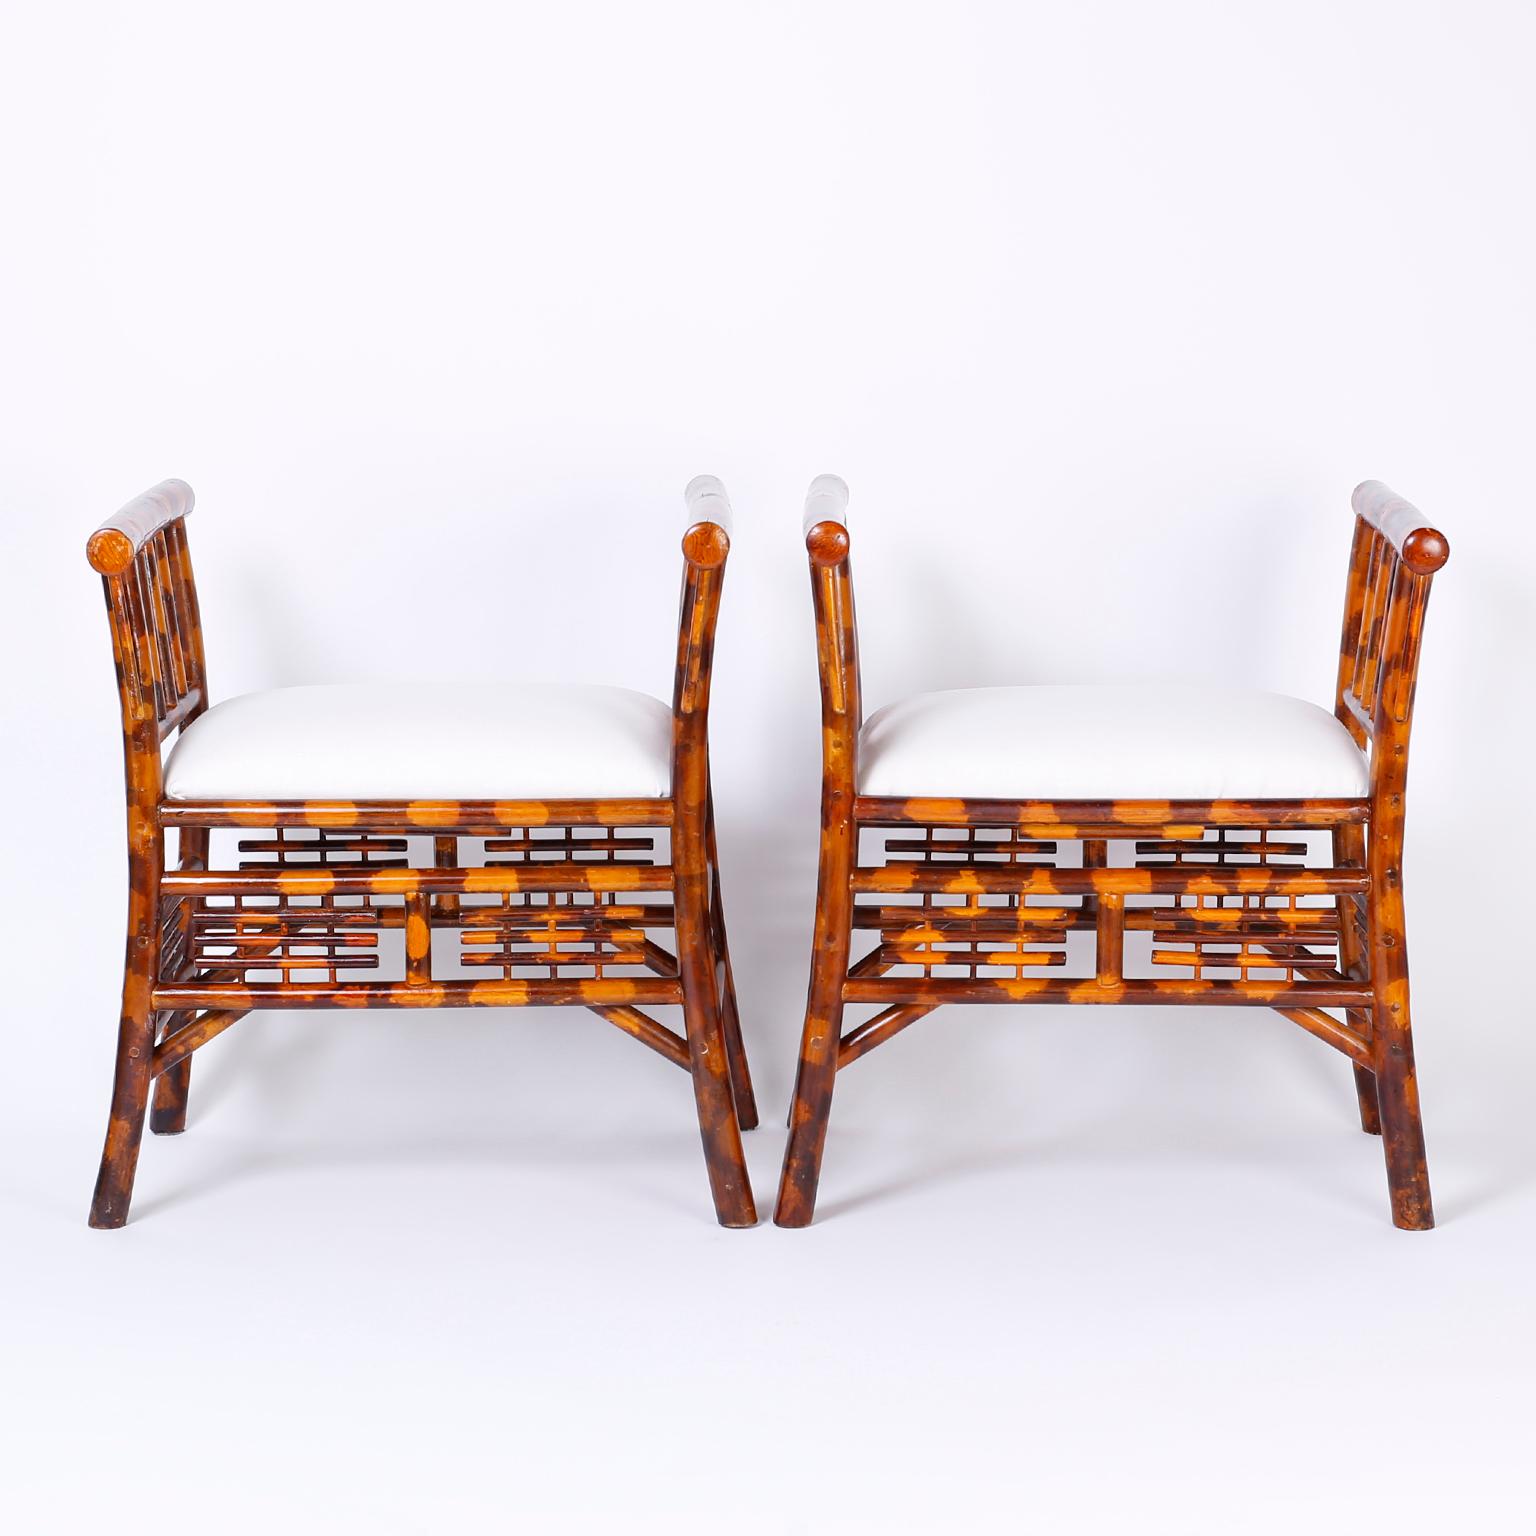 Stand out pair of benches with a chic Asian modern form, featuring unusual high arms, alluring faux burnt bamboo finish, and decorative chinoiserie style panels.